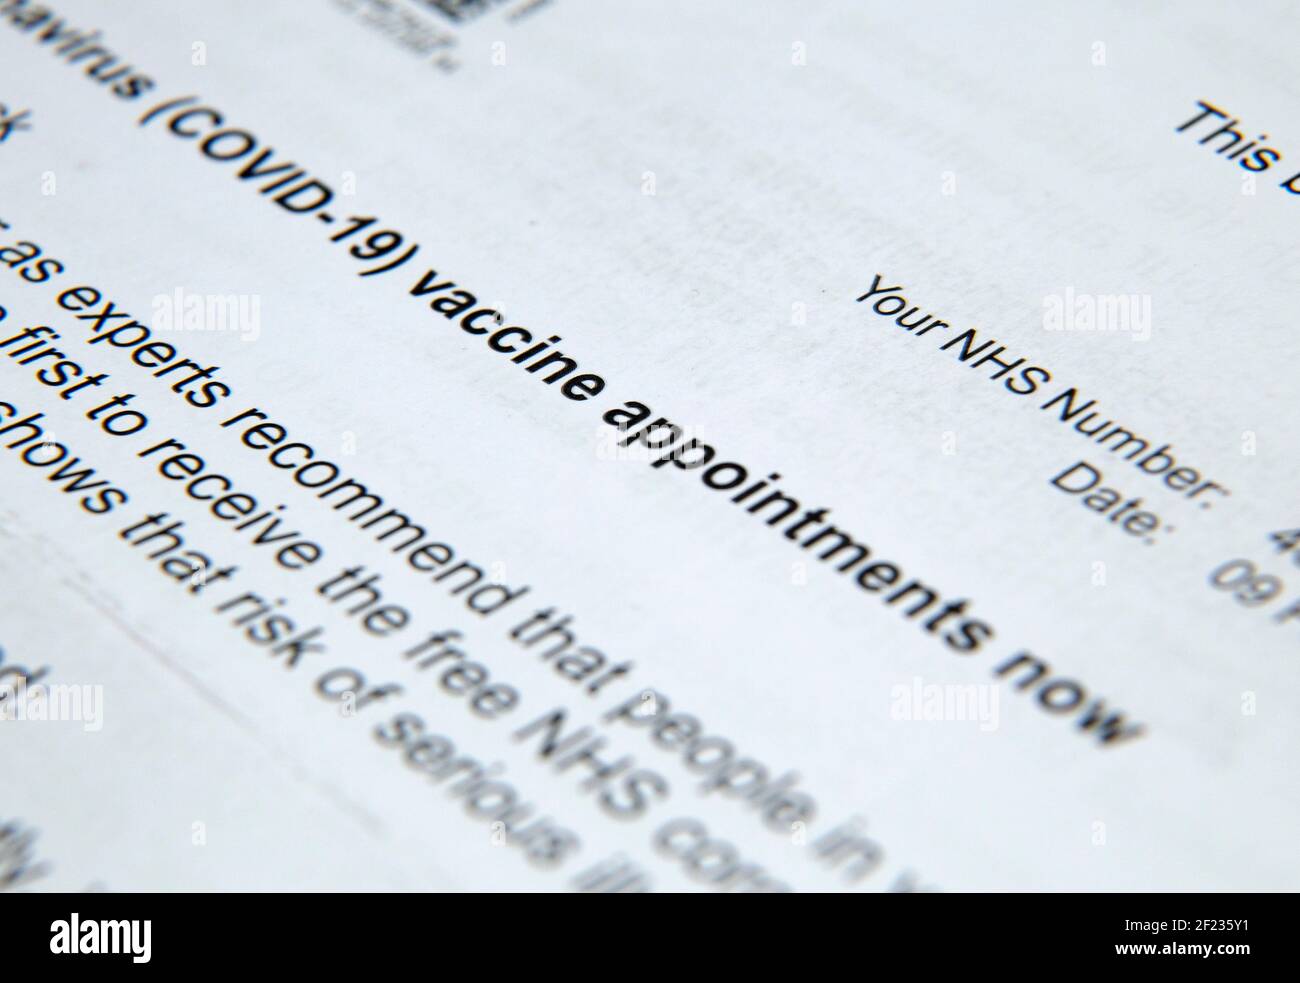 Appointment letter for a Covid 19 Coronavirus vaccination. Stock Photo